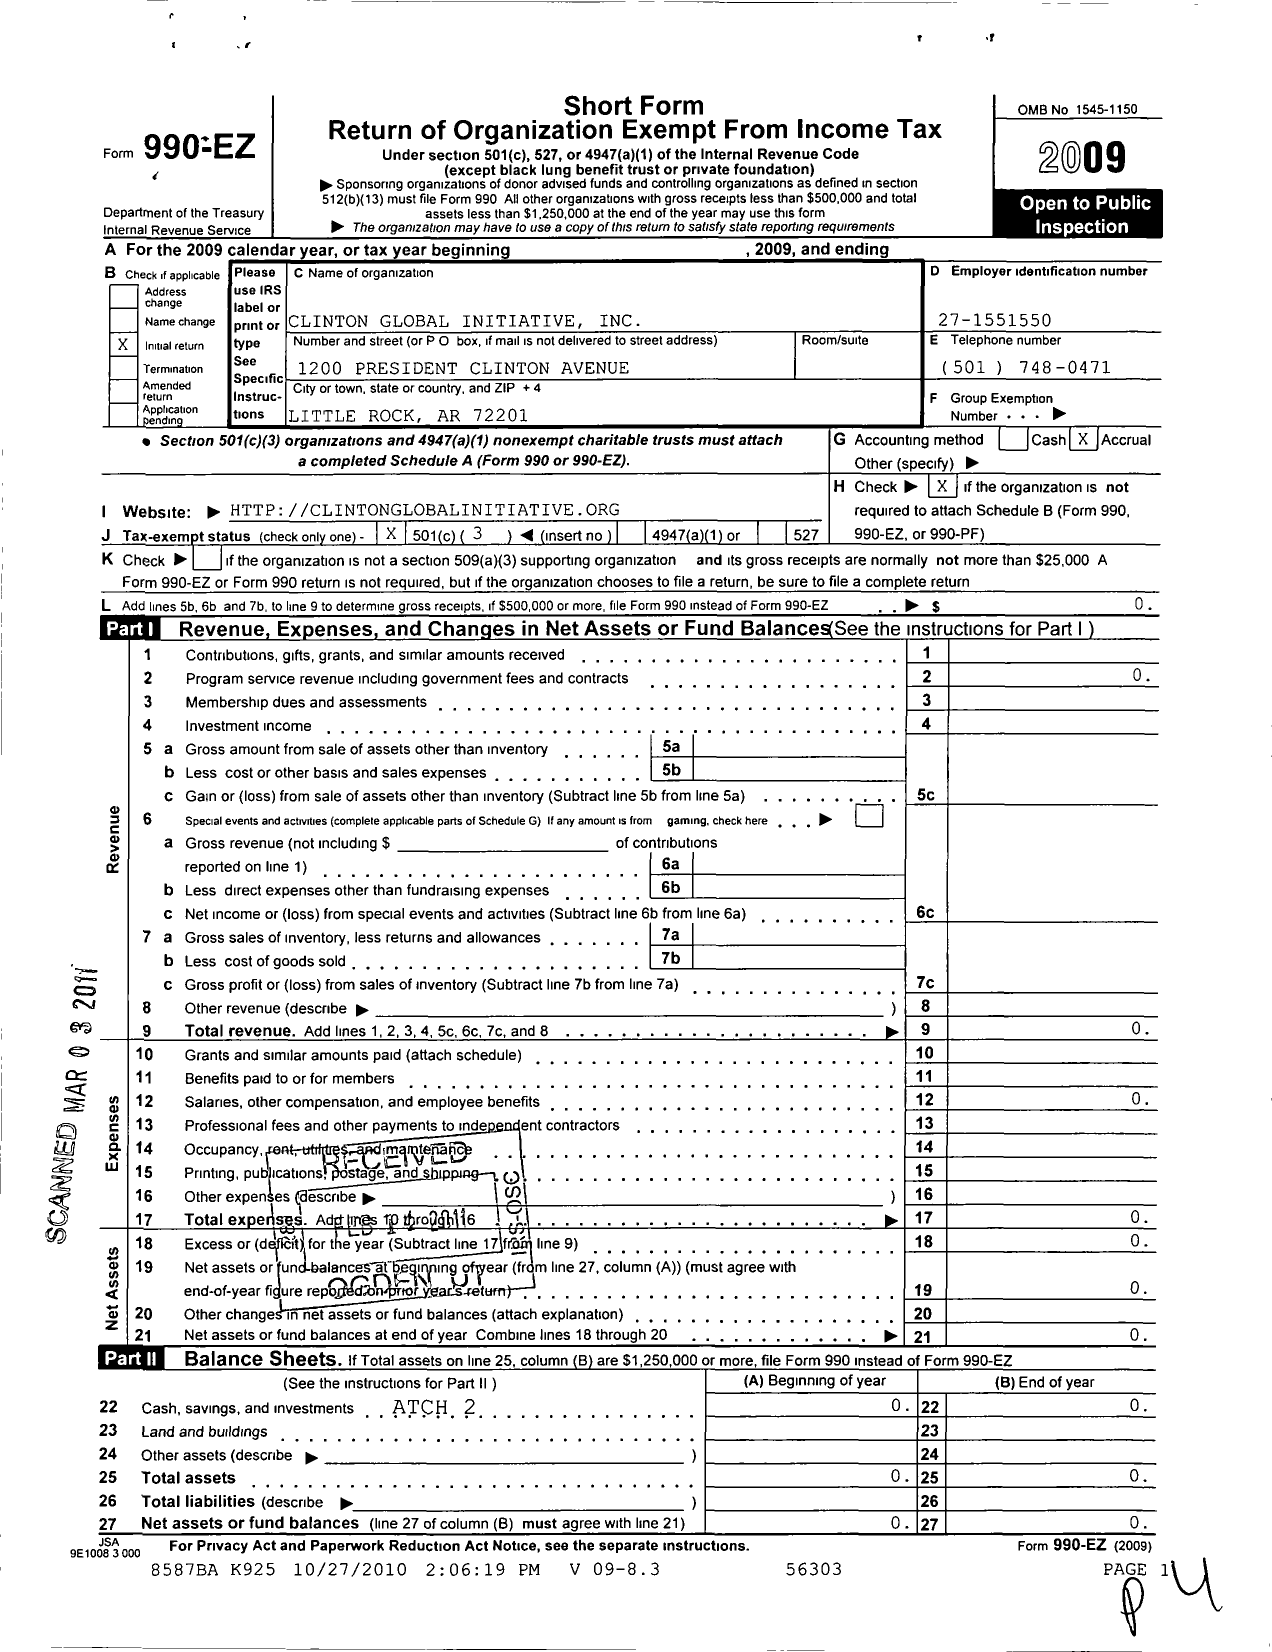 Image of first page of 2009 Form 990EZ for Clinton Global Initiative (CGI)